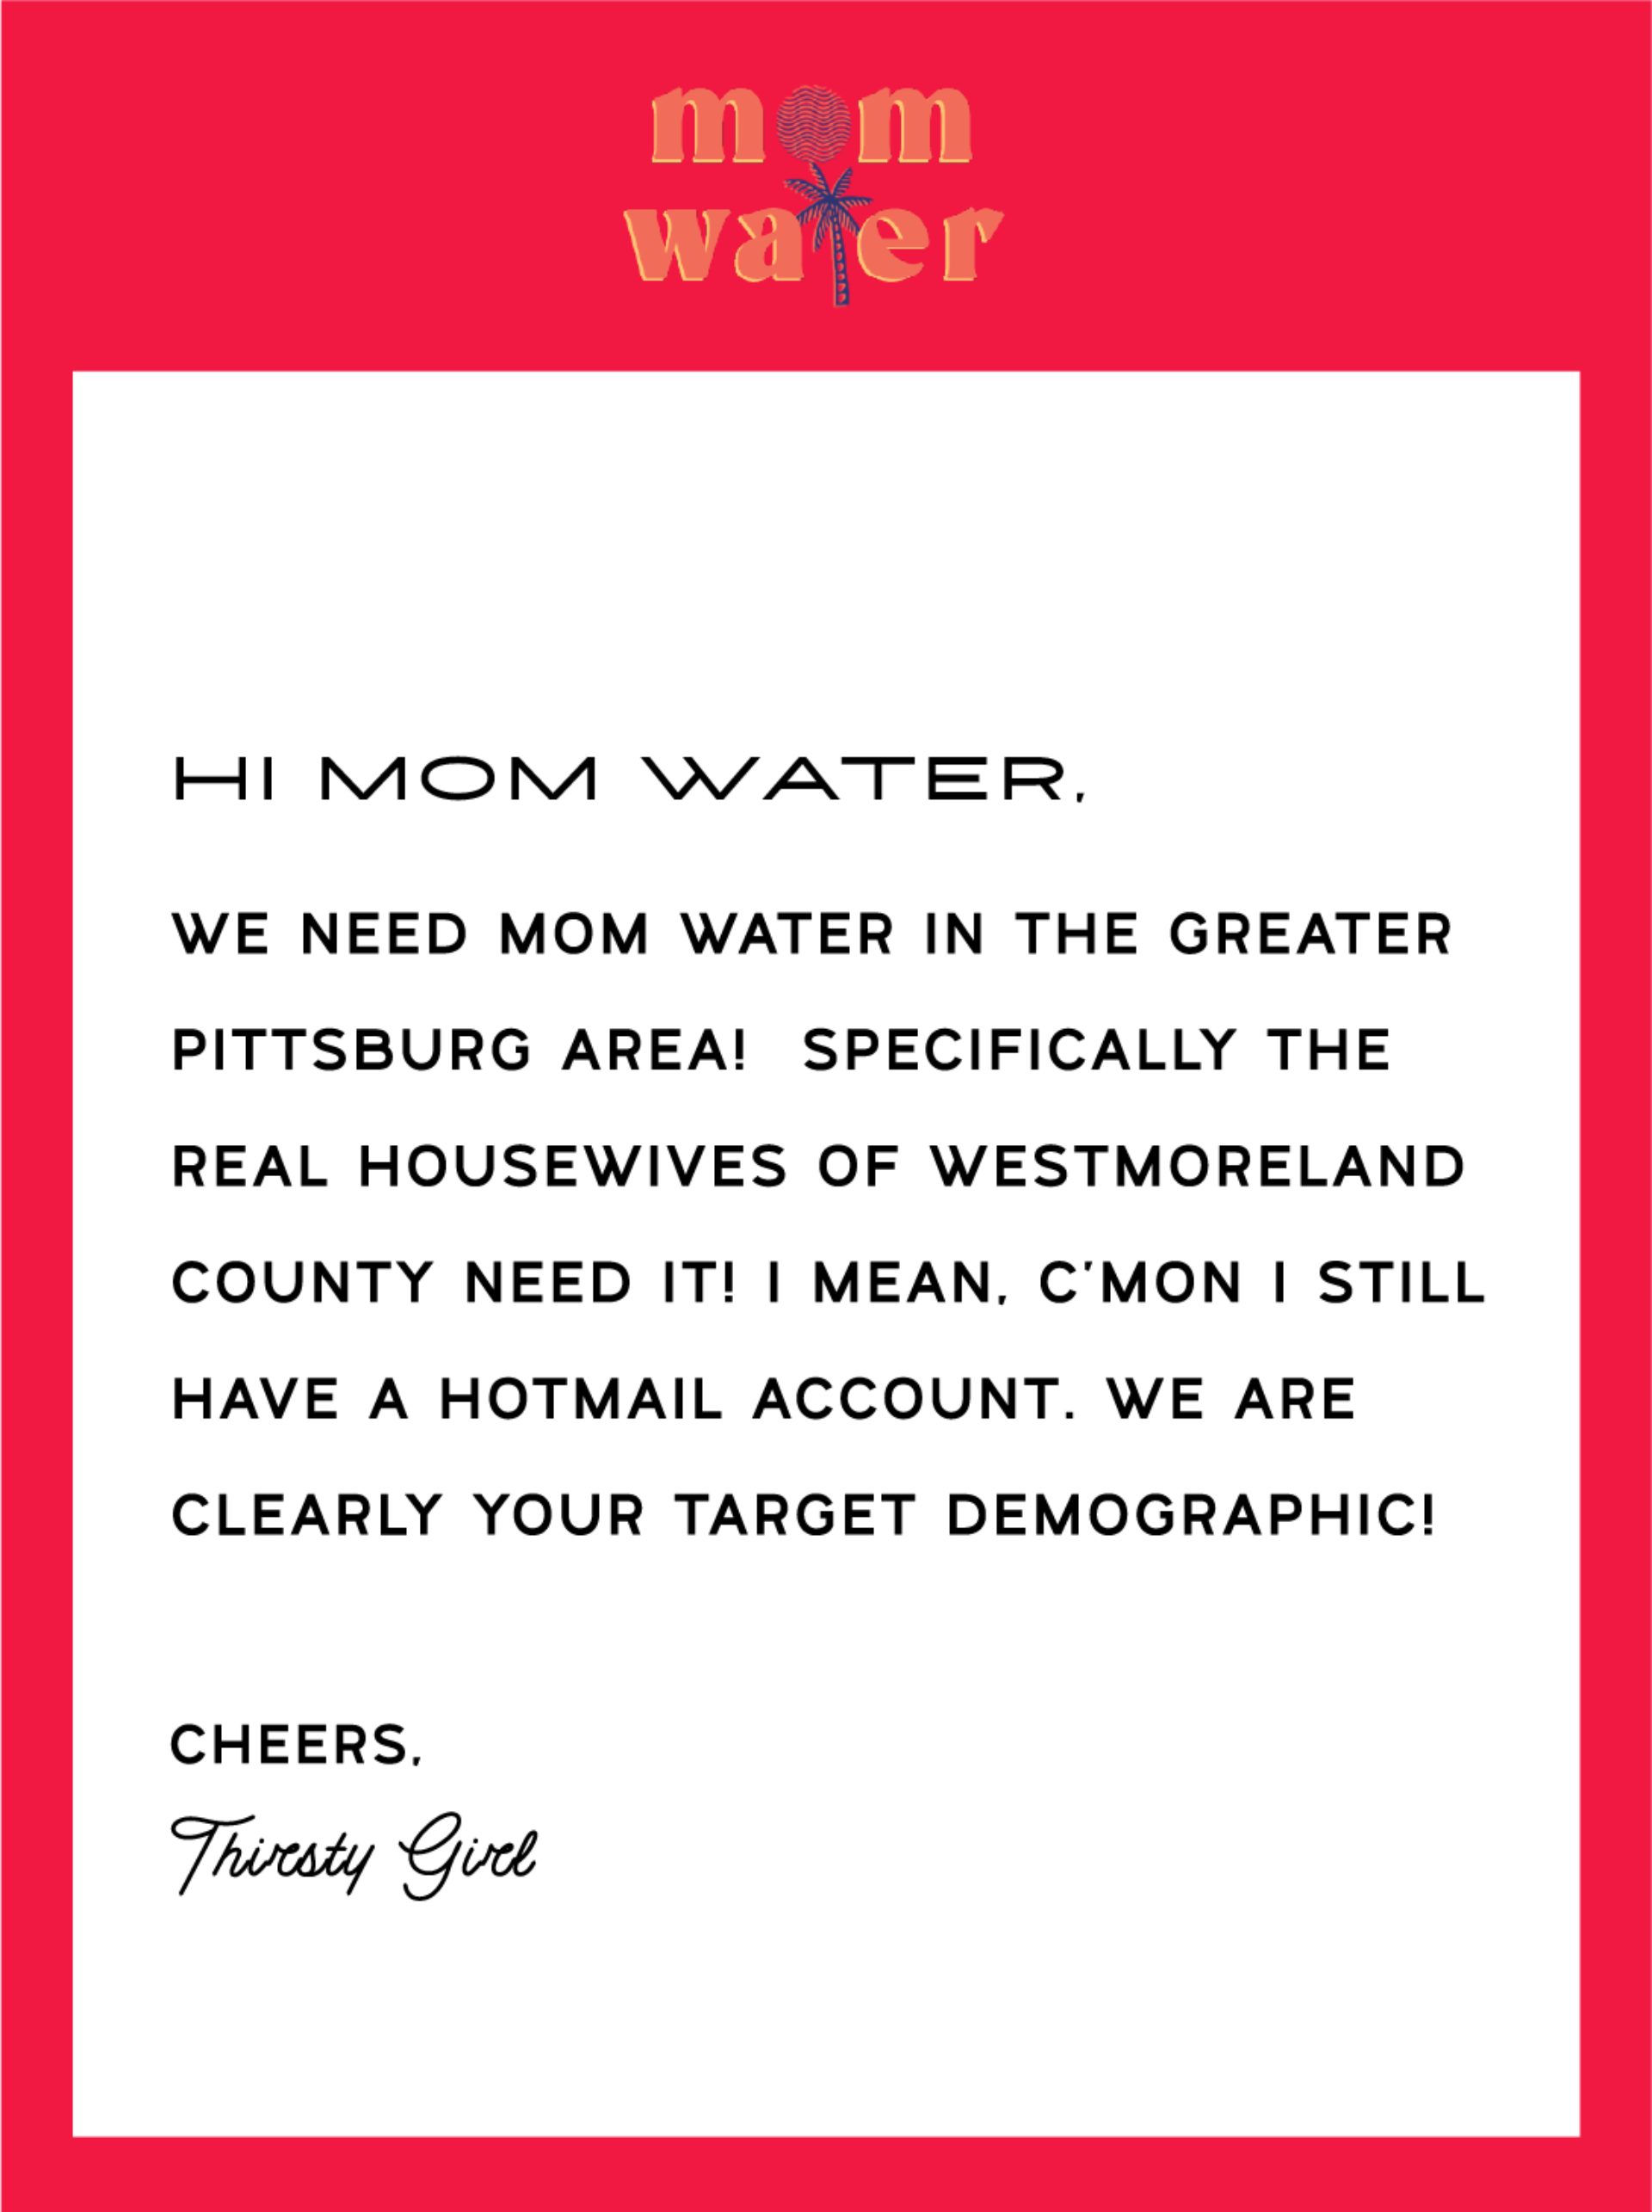 Mom water email 2